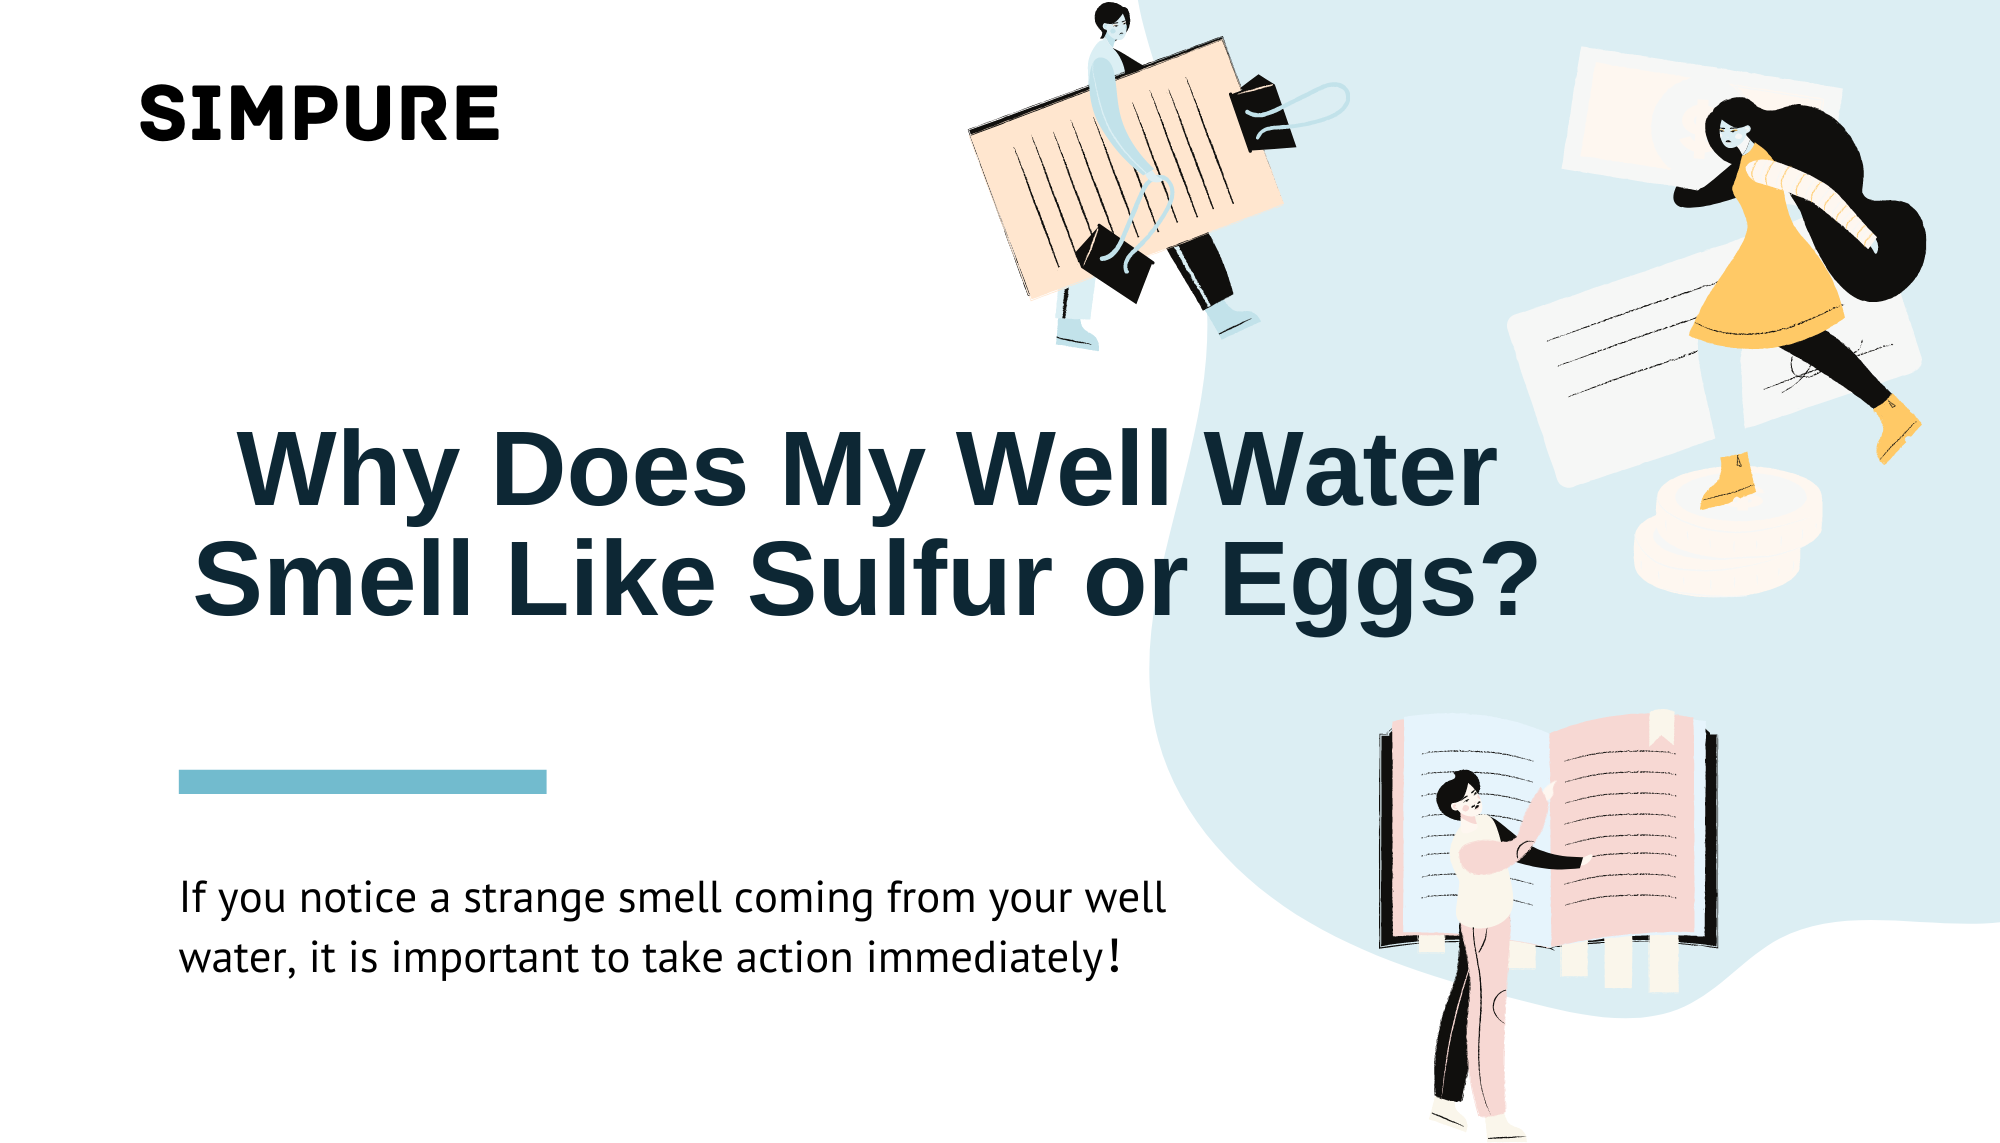 Why Does My Water Smell Like Rotten Eggs?